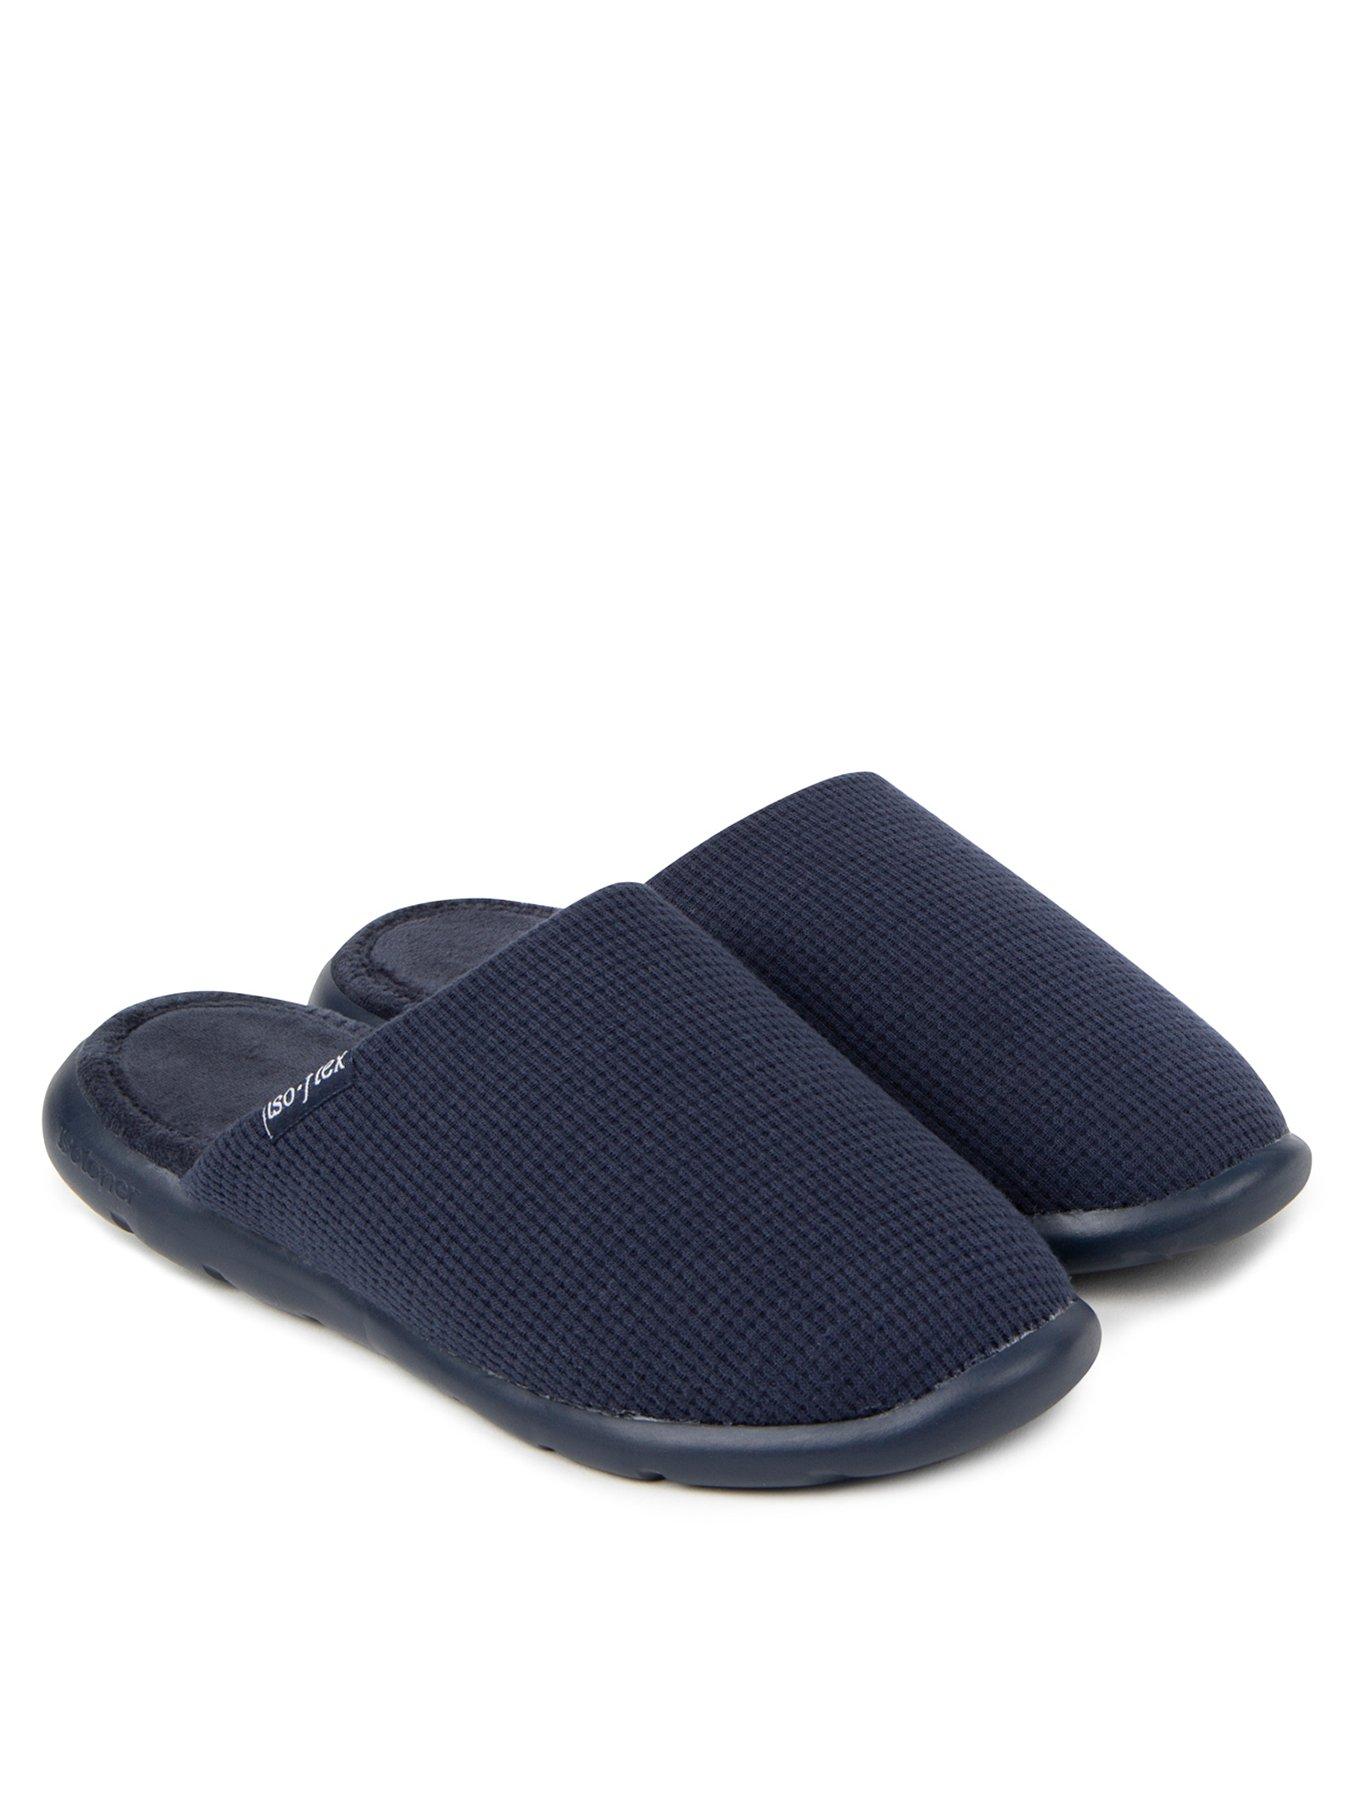  Totes Iso-flex Waffle Mule With Memory Foam